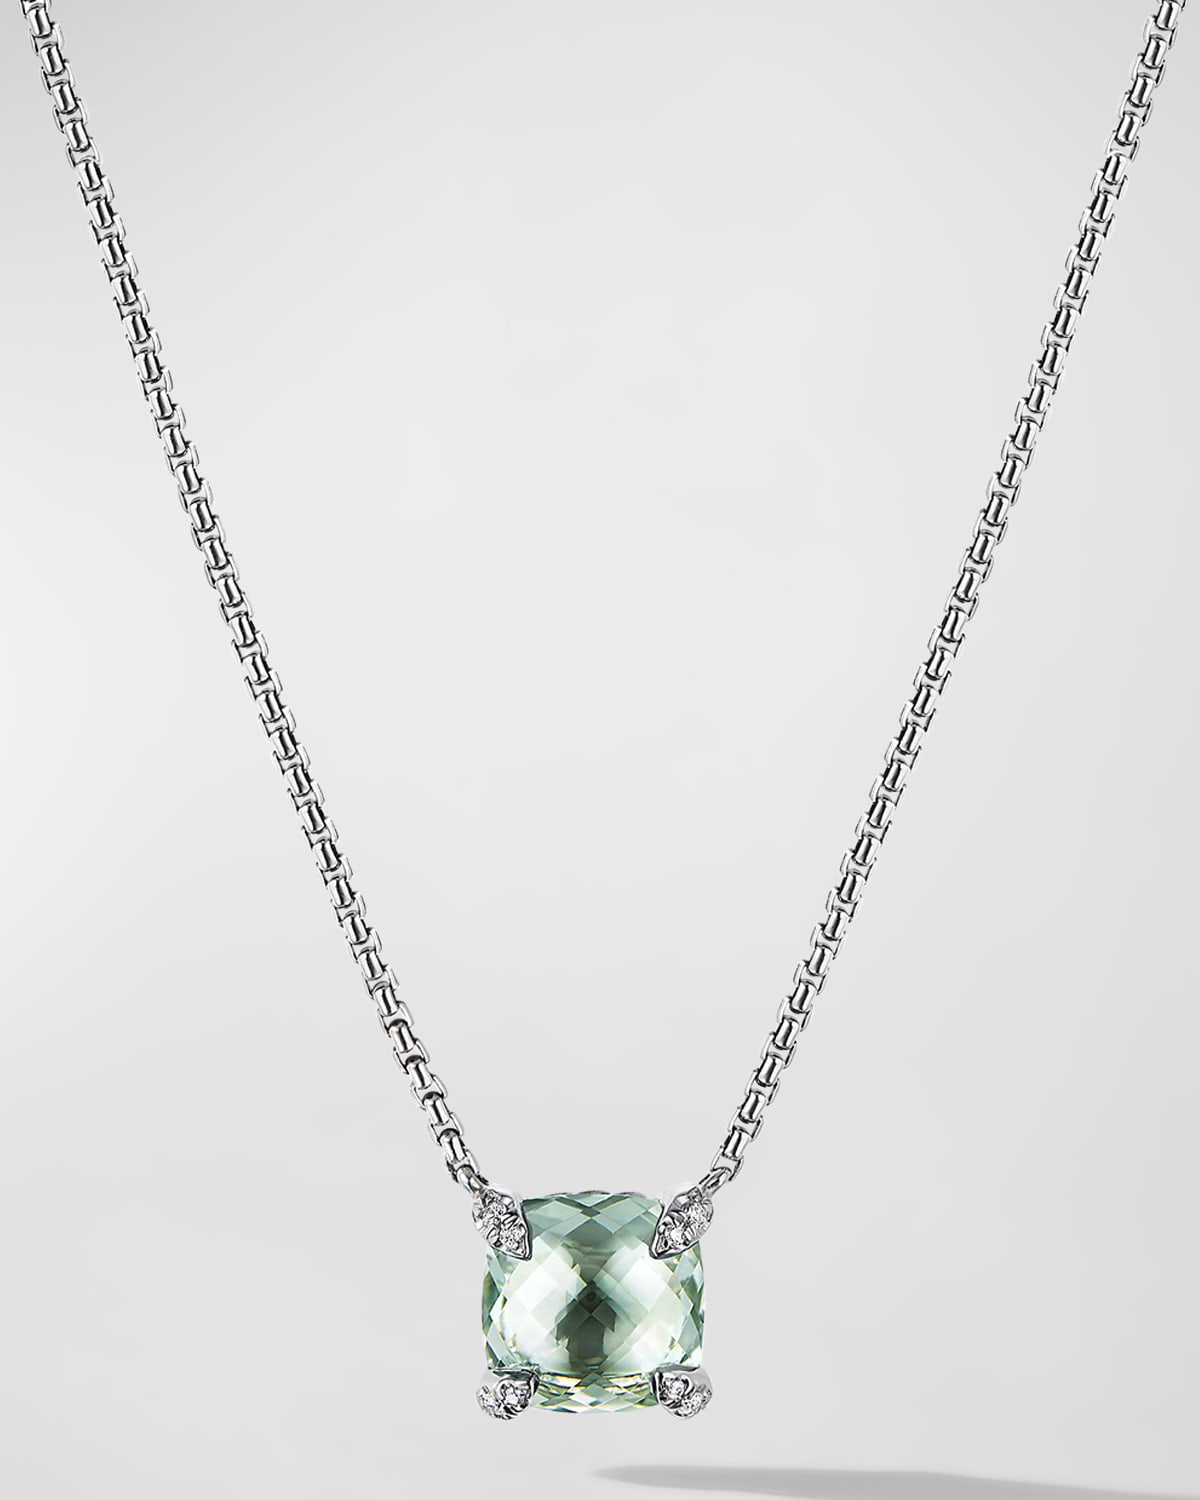 DAVID YURMAN CHATELAINE CUSHION PENDANT NECKLACE WITH GEMSTONE AND DIAMONDS IN SILVER, 8MM, 16-18"L,PROD245350012